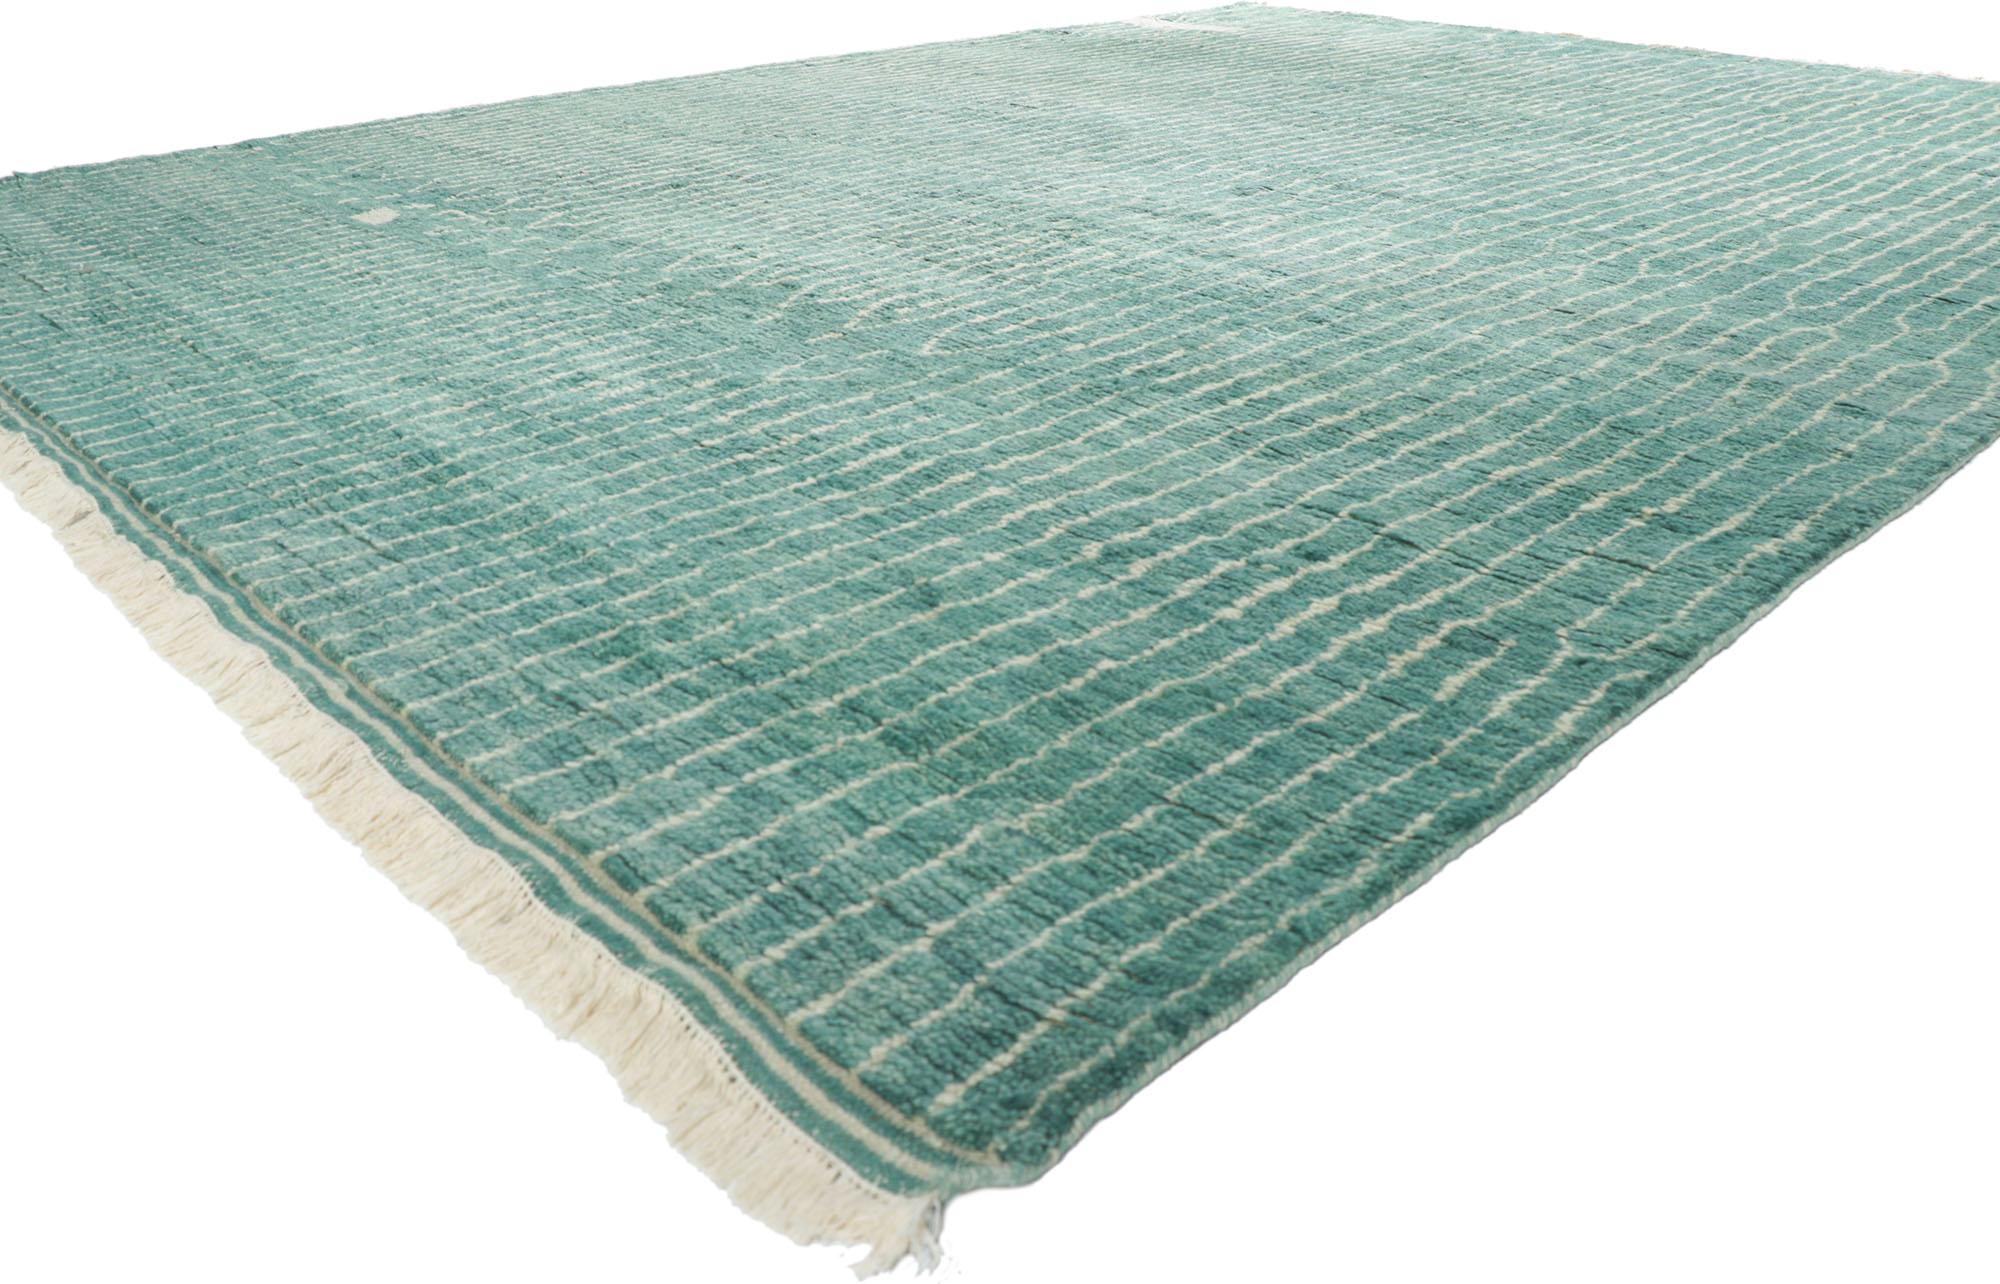 30771 New Contemporary Moroccan Style Rug 12'03 x 14'08. Channeling a coastal cottage with colors reminiscence of sea glass and weathered wood, this hand-knotted wool contemporary Moroccan style rug is a captivating vision of woven beauty. The